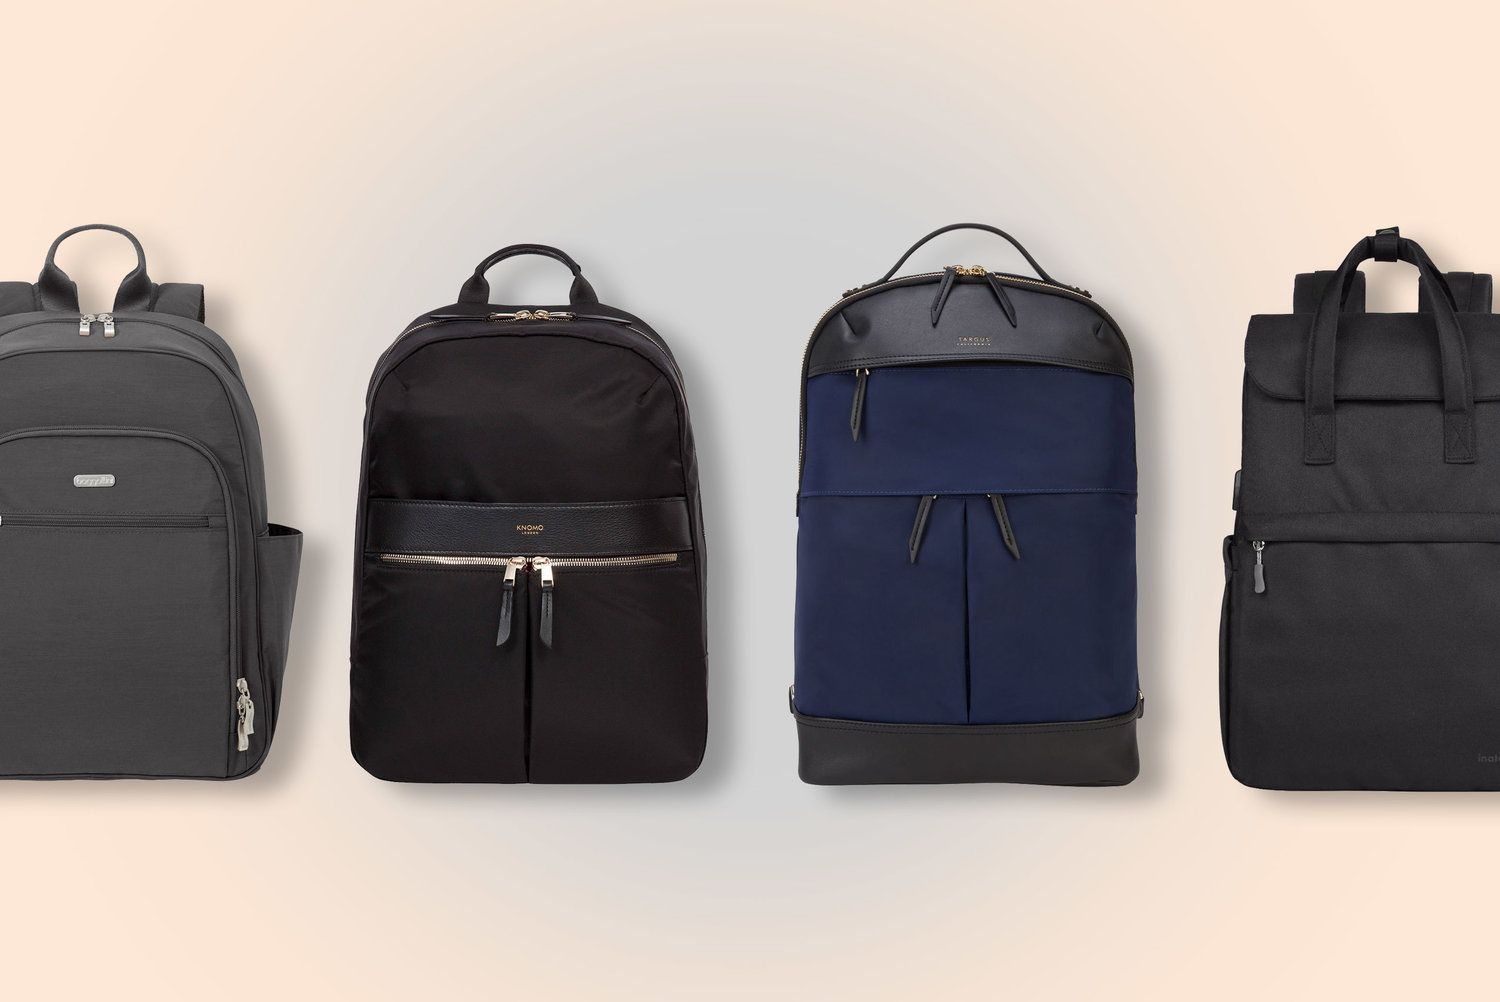 10 Best Women S Backpacks For Work That Are Sophisticated And Smart Backpackies